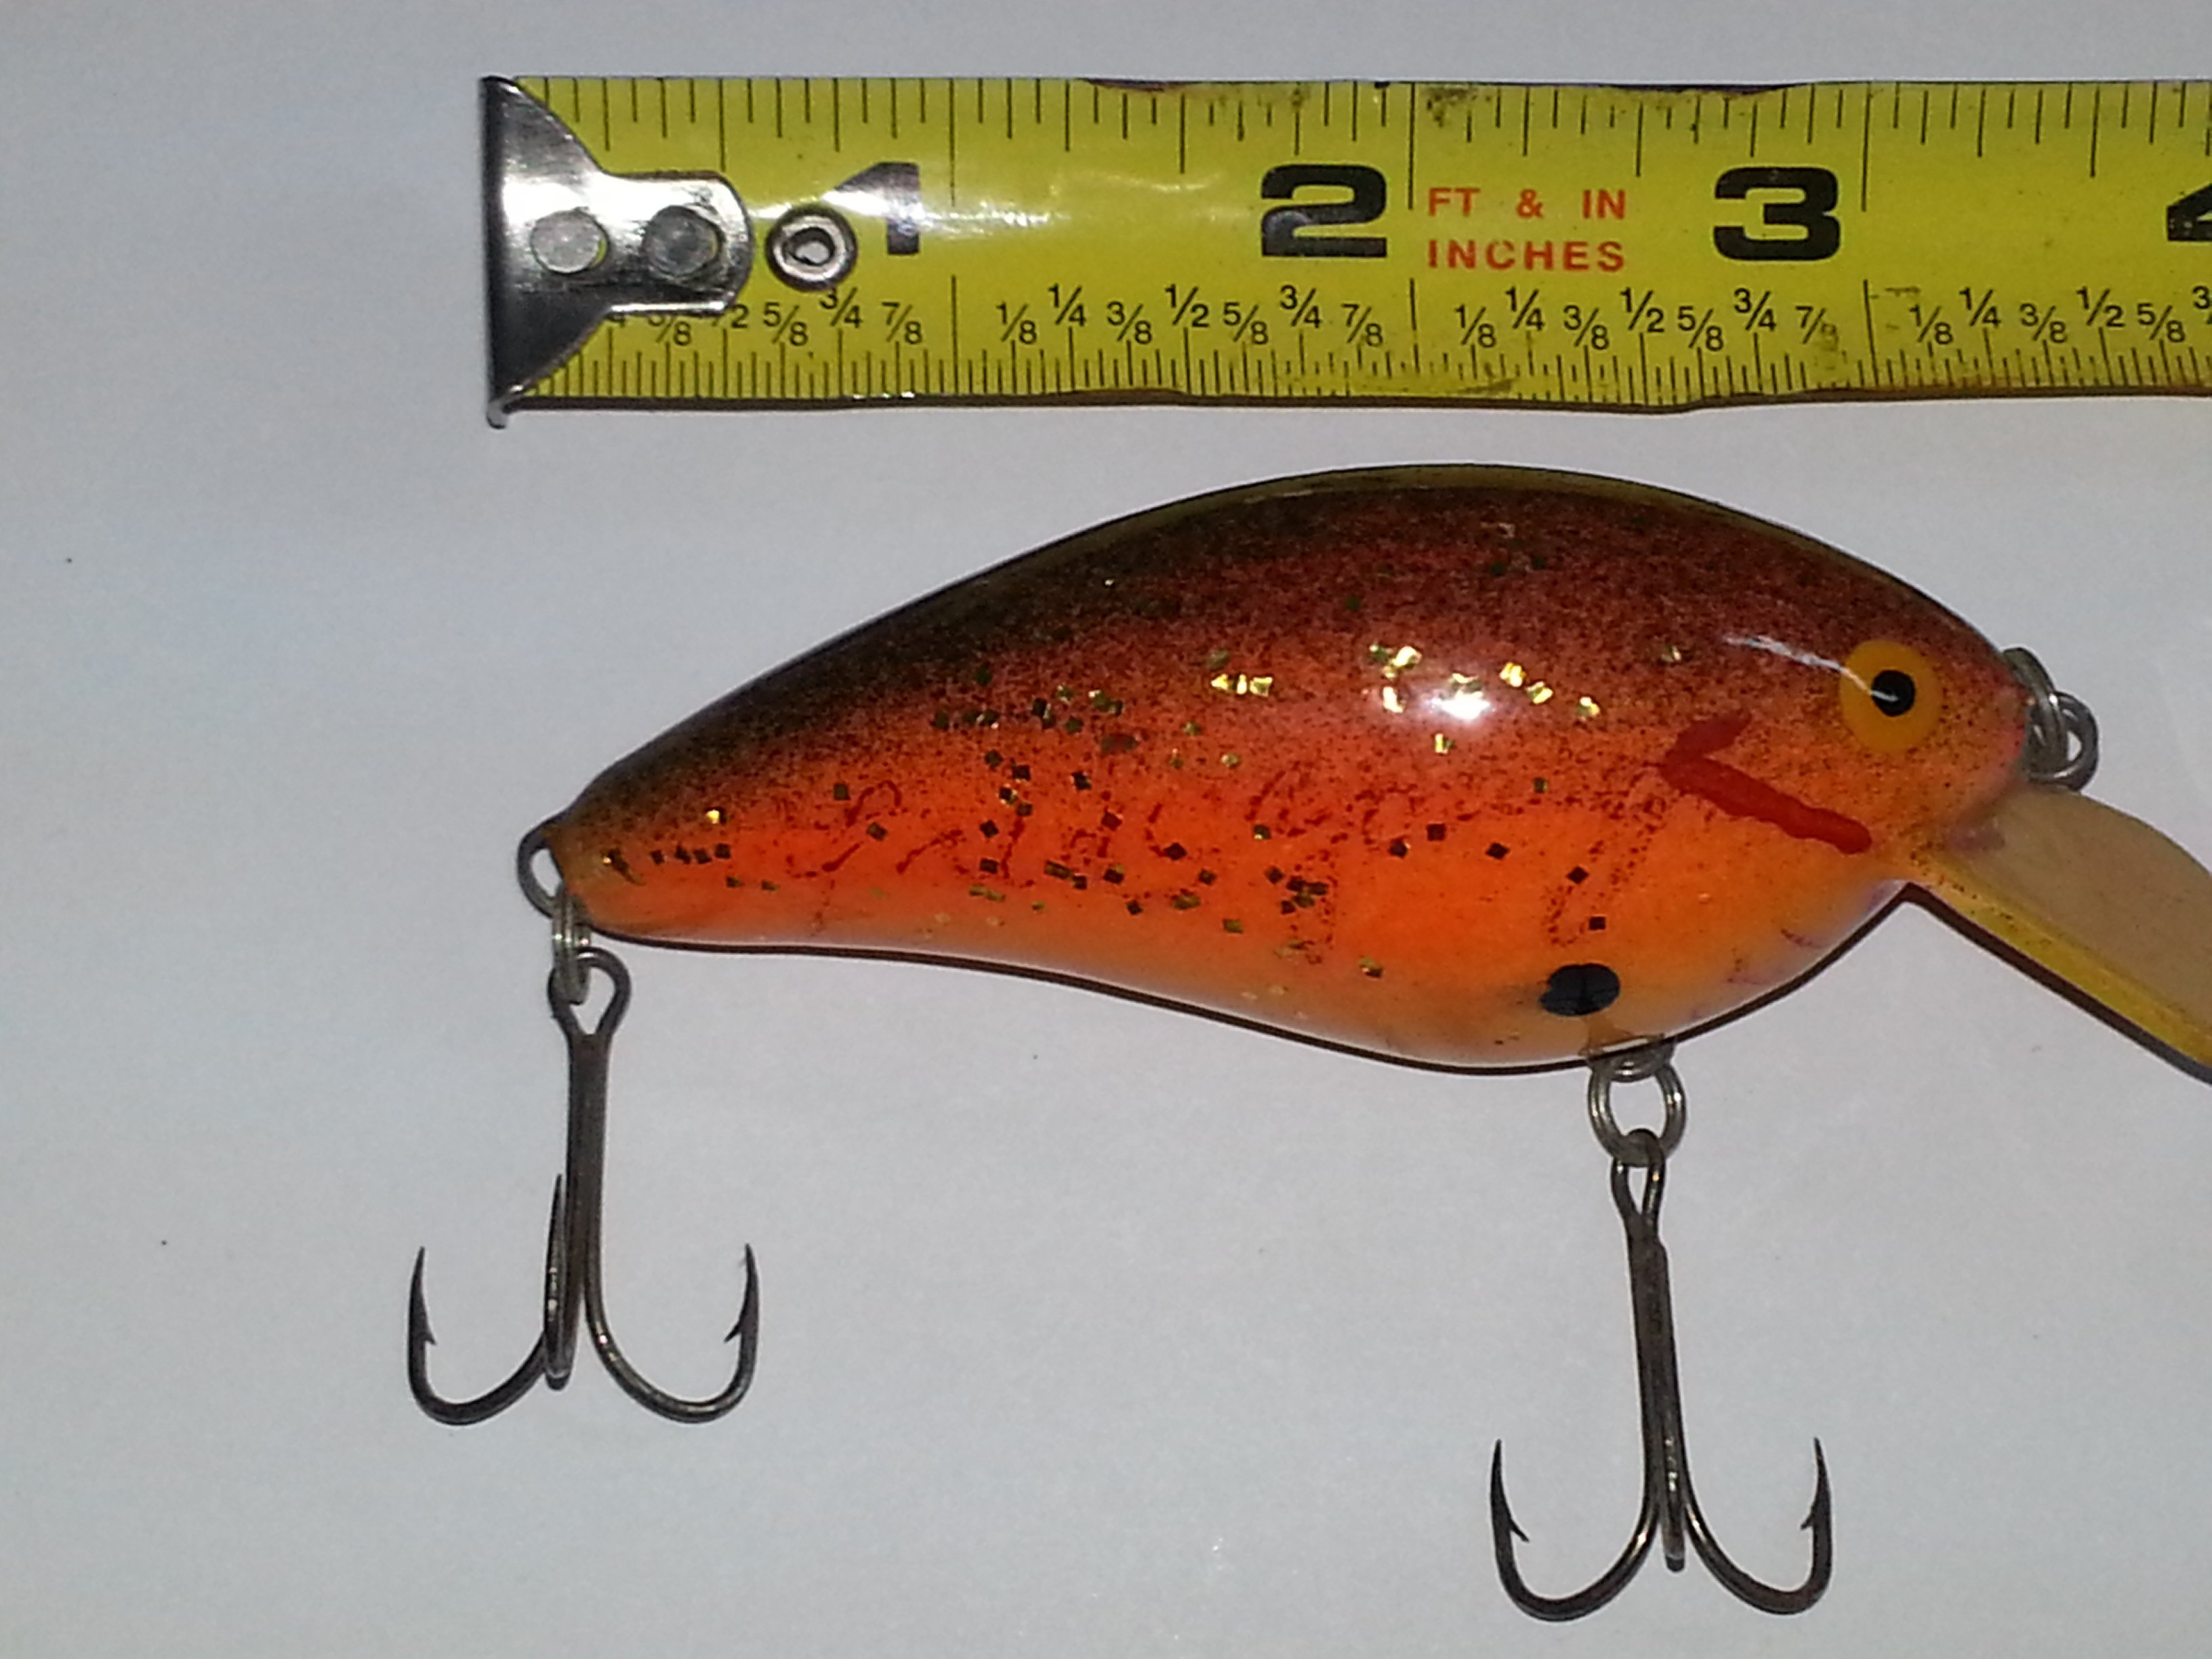 Need Held In Identifying Fred C Young Lures - Hard Baits -   - Tackle Building Forums